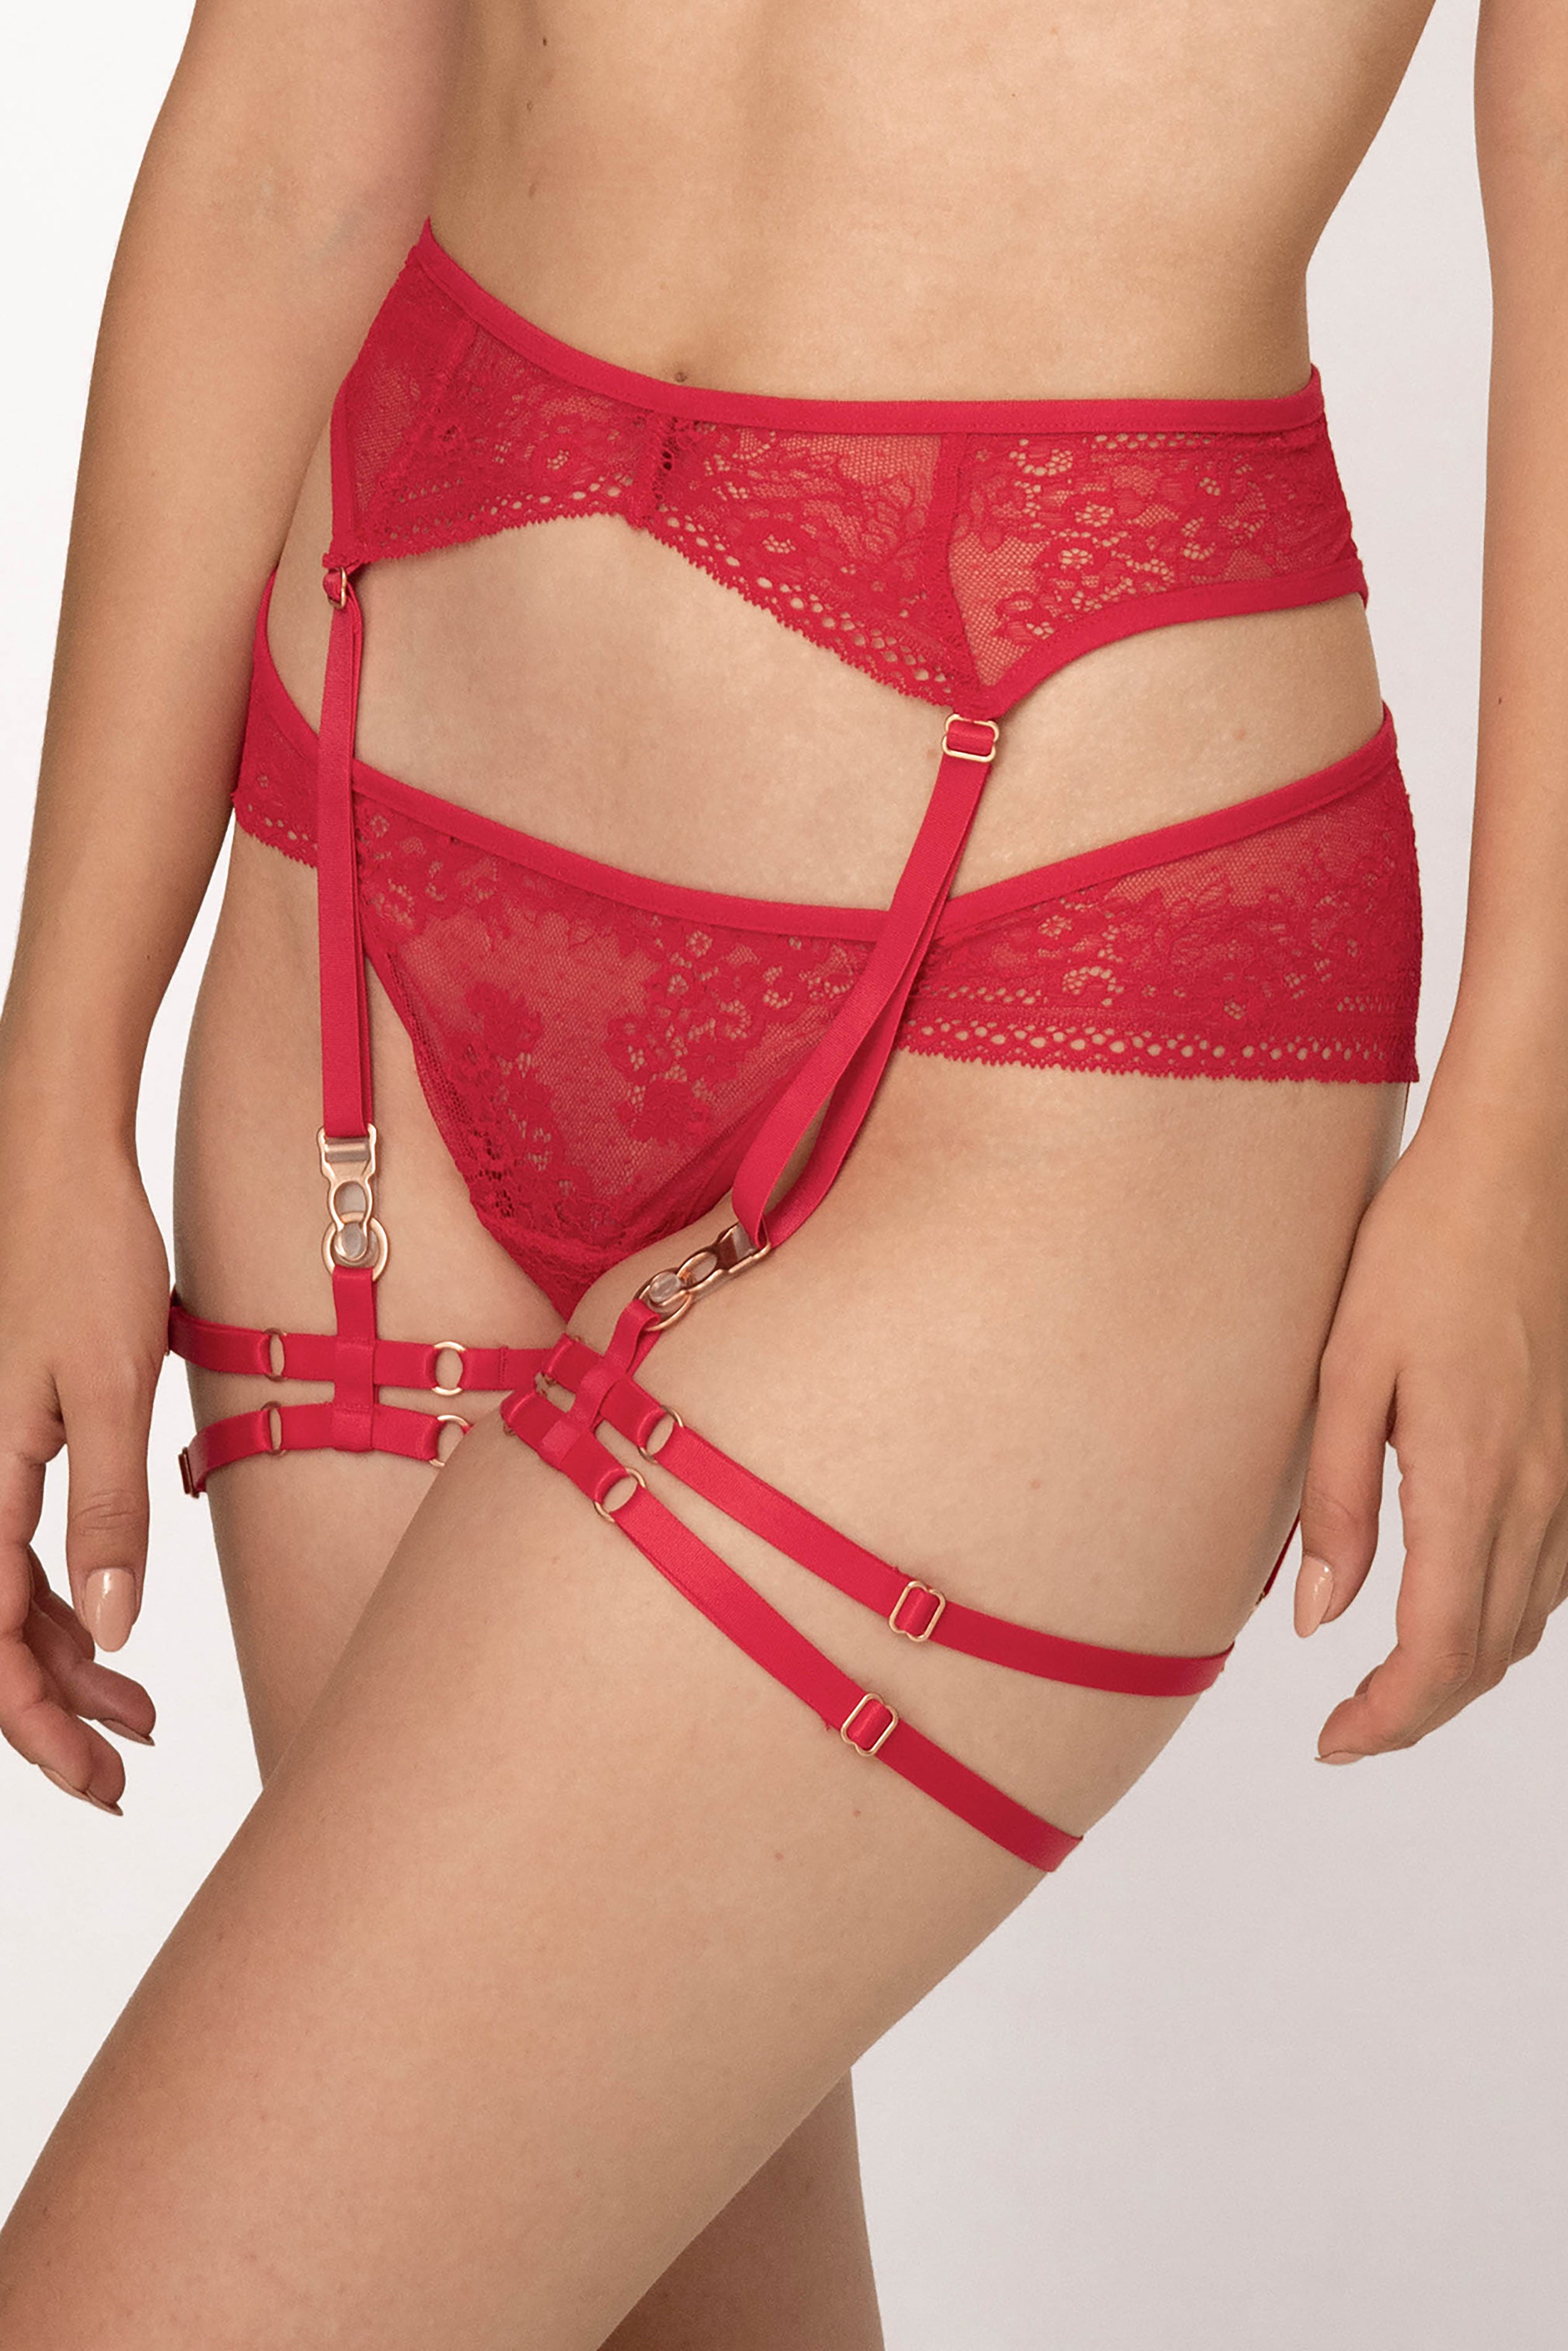 ALICIA RED GARTERS